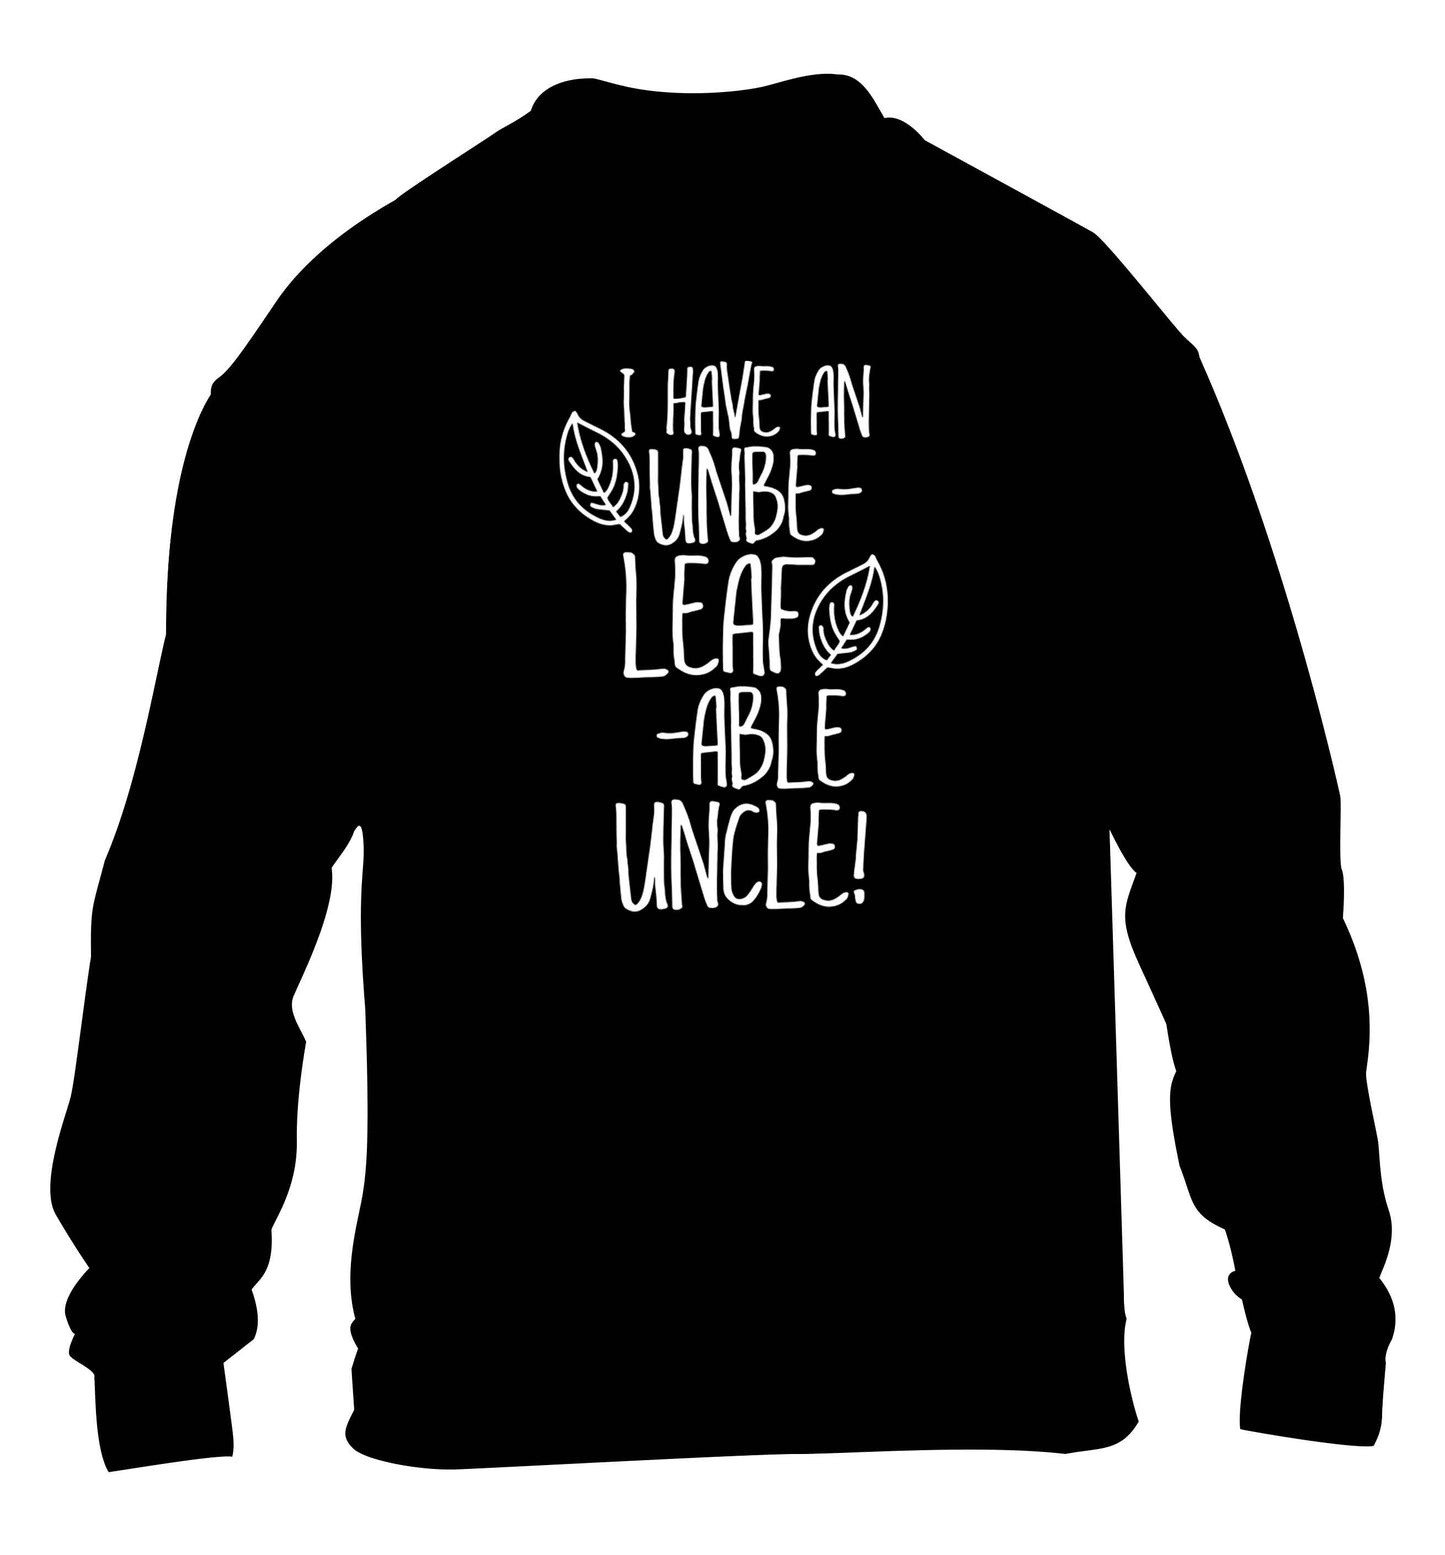 I have an unbe-leaf-able uncle children's black sweater 12-13 Years